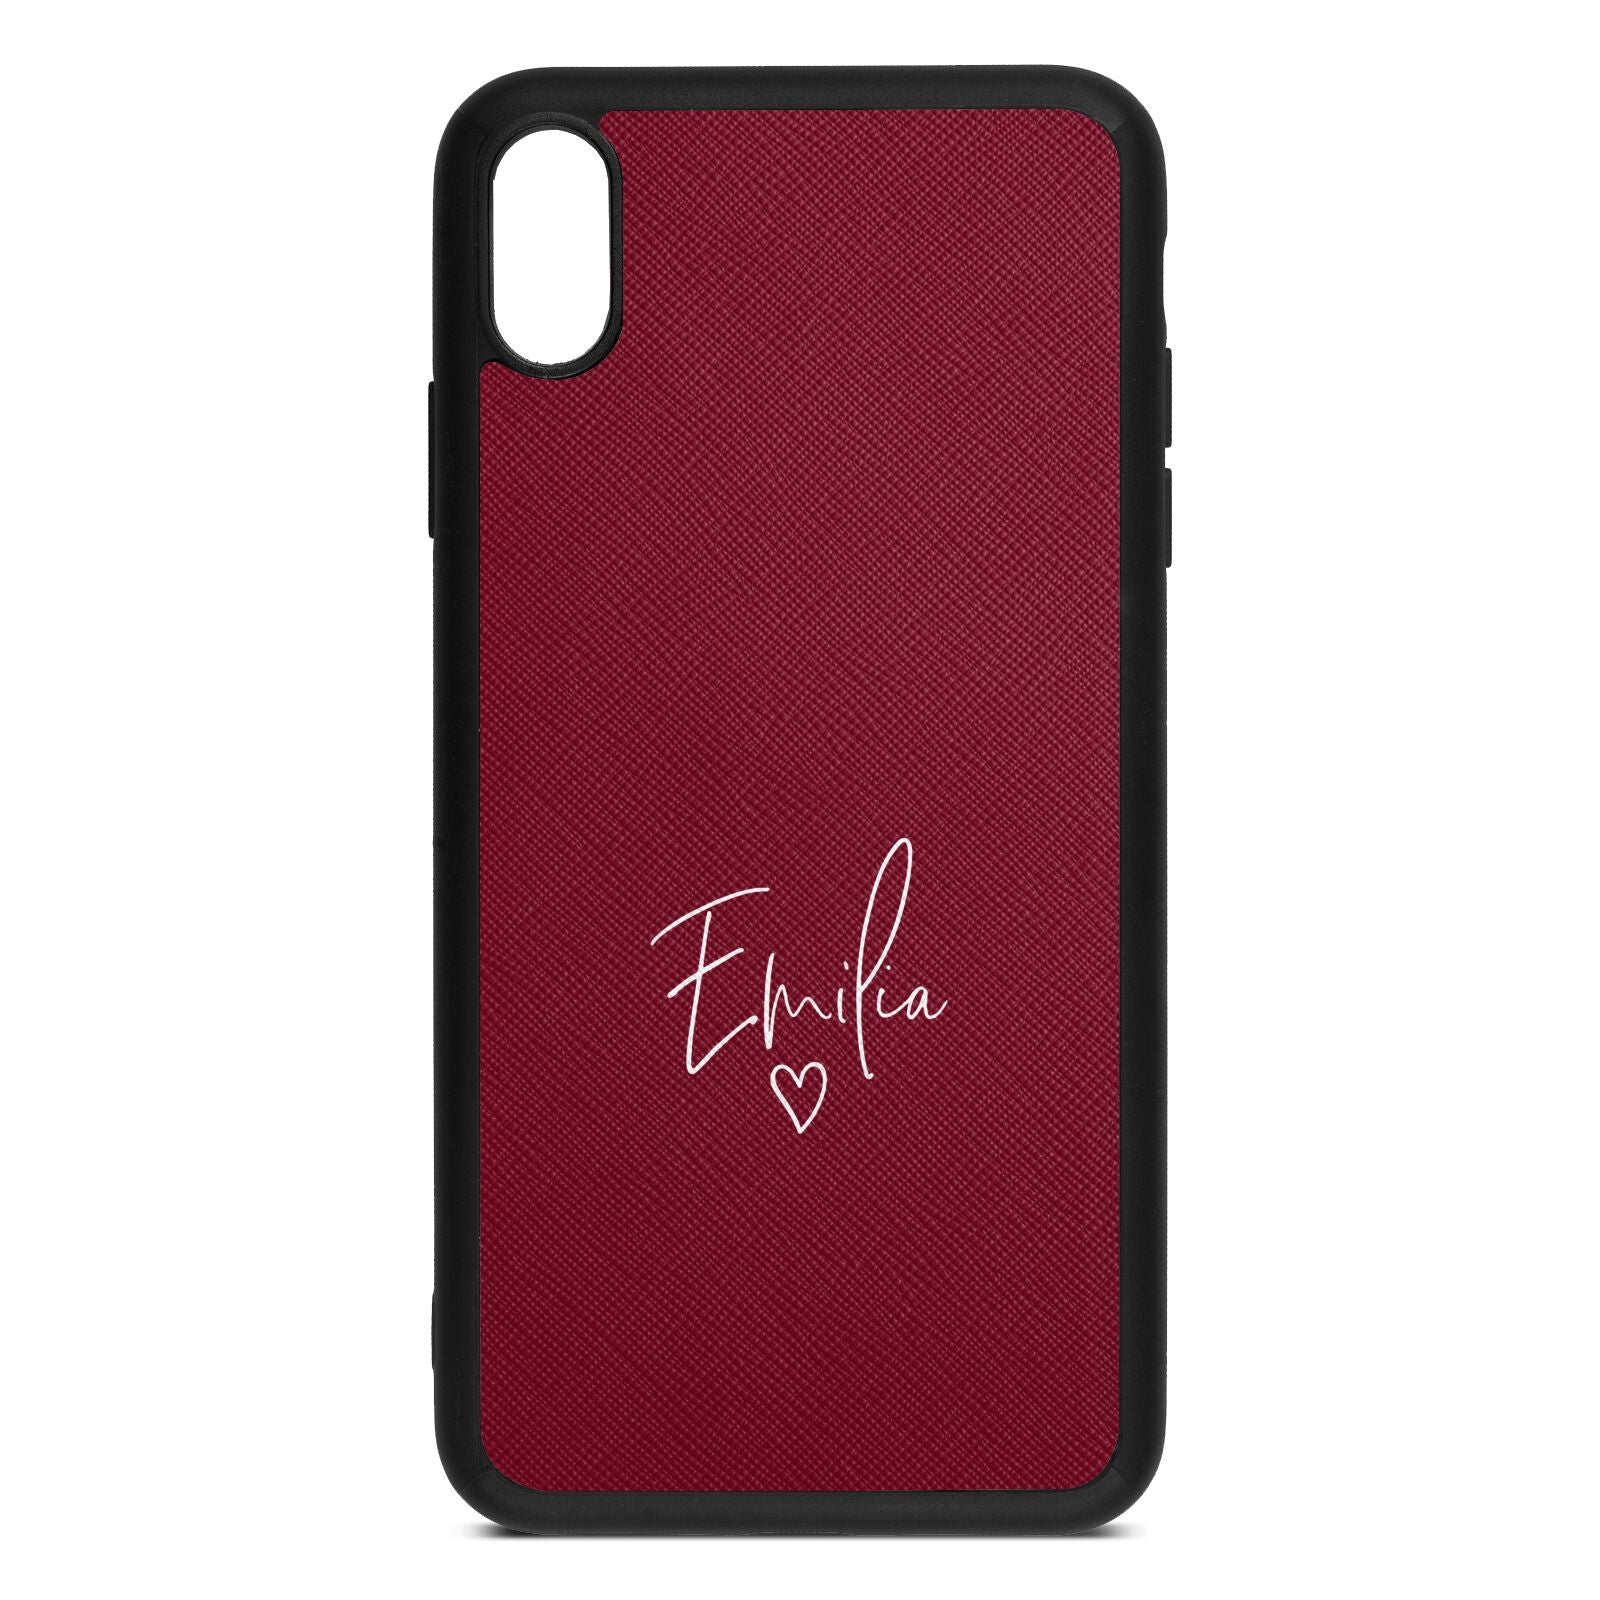 White Handwritten Name Transparent Wine Red Saffiano Leather iPhone Xs Max Case